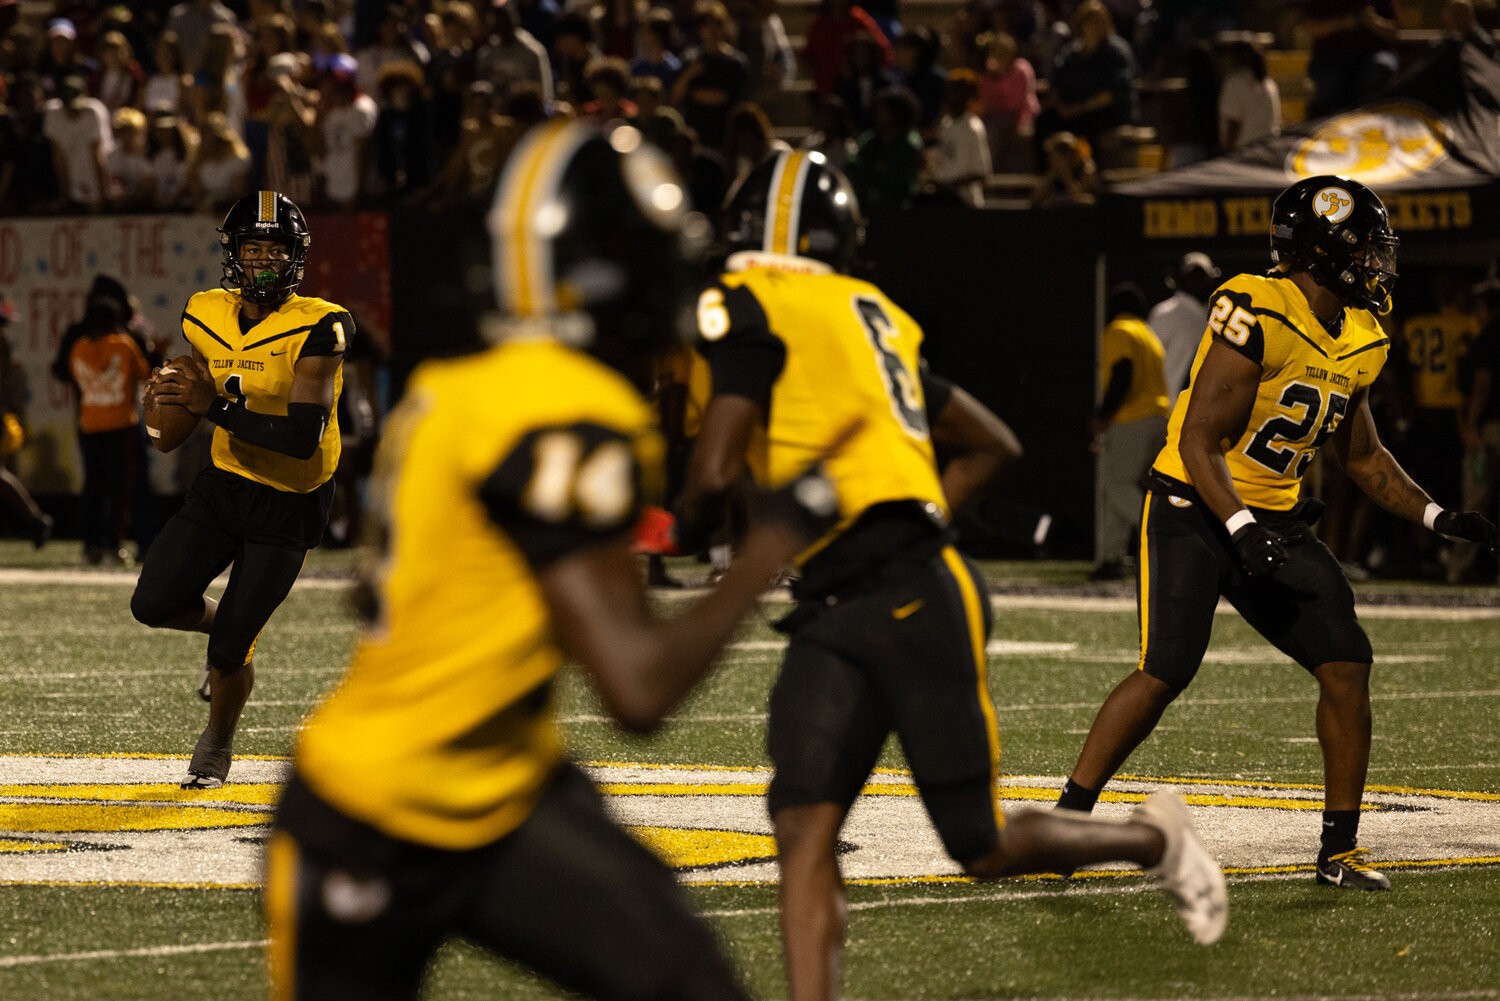 Electric Irmo quarterback A.J. Brand rolls out to pass during Irmo's 54-0 win over Airport.